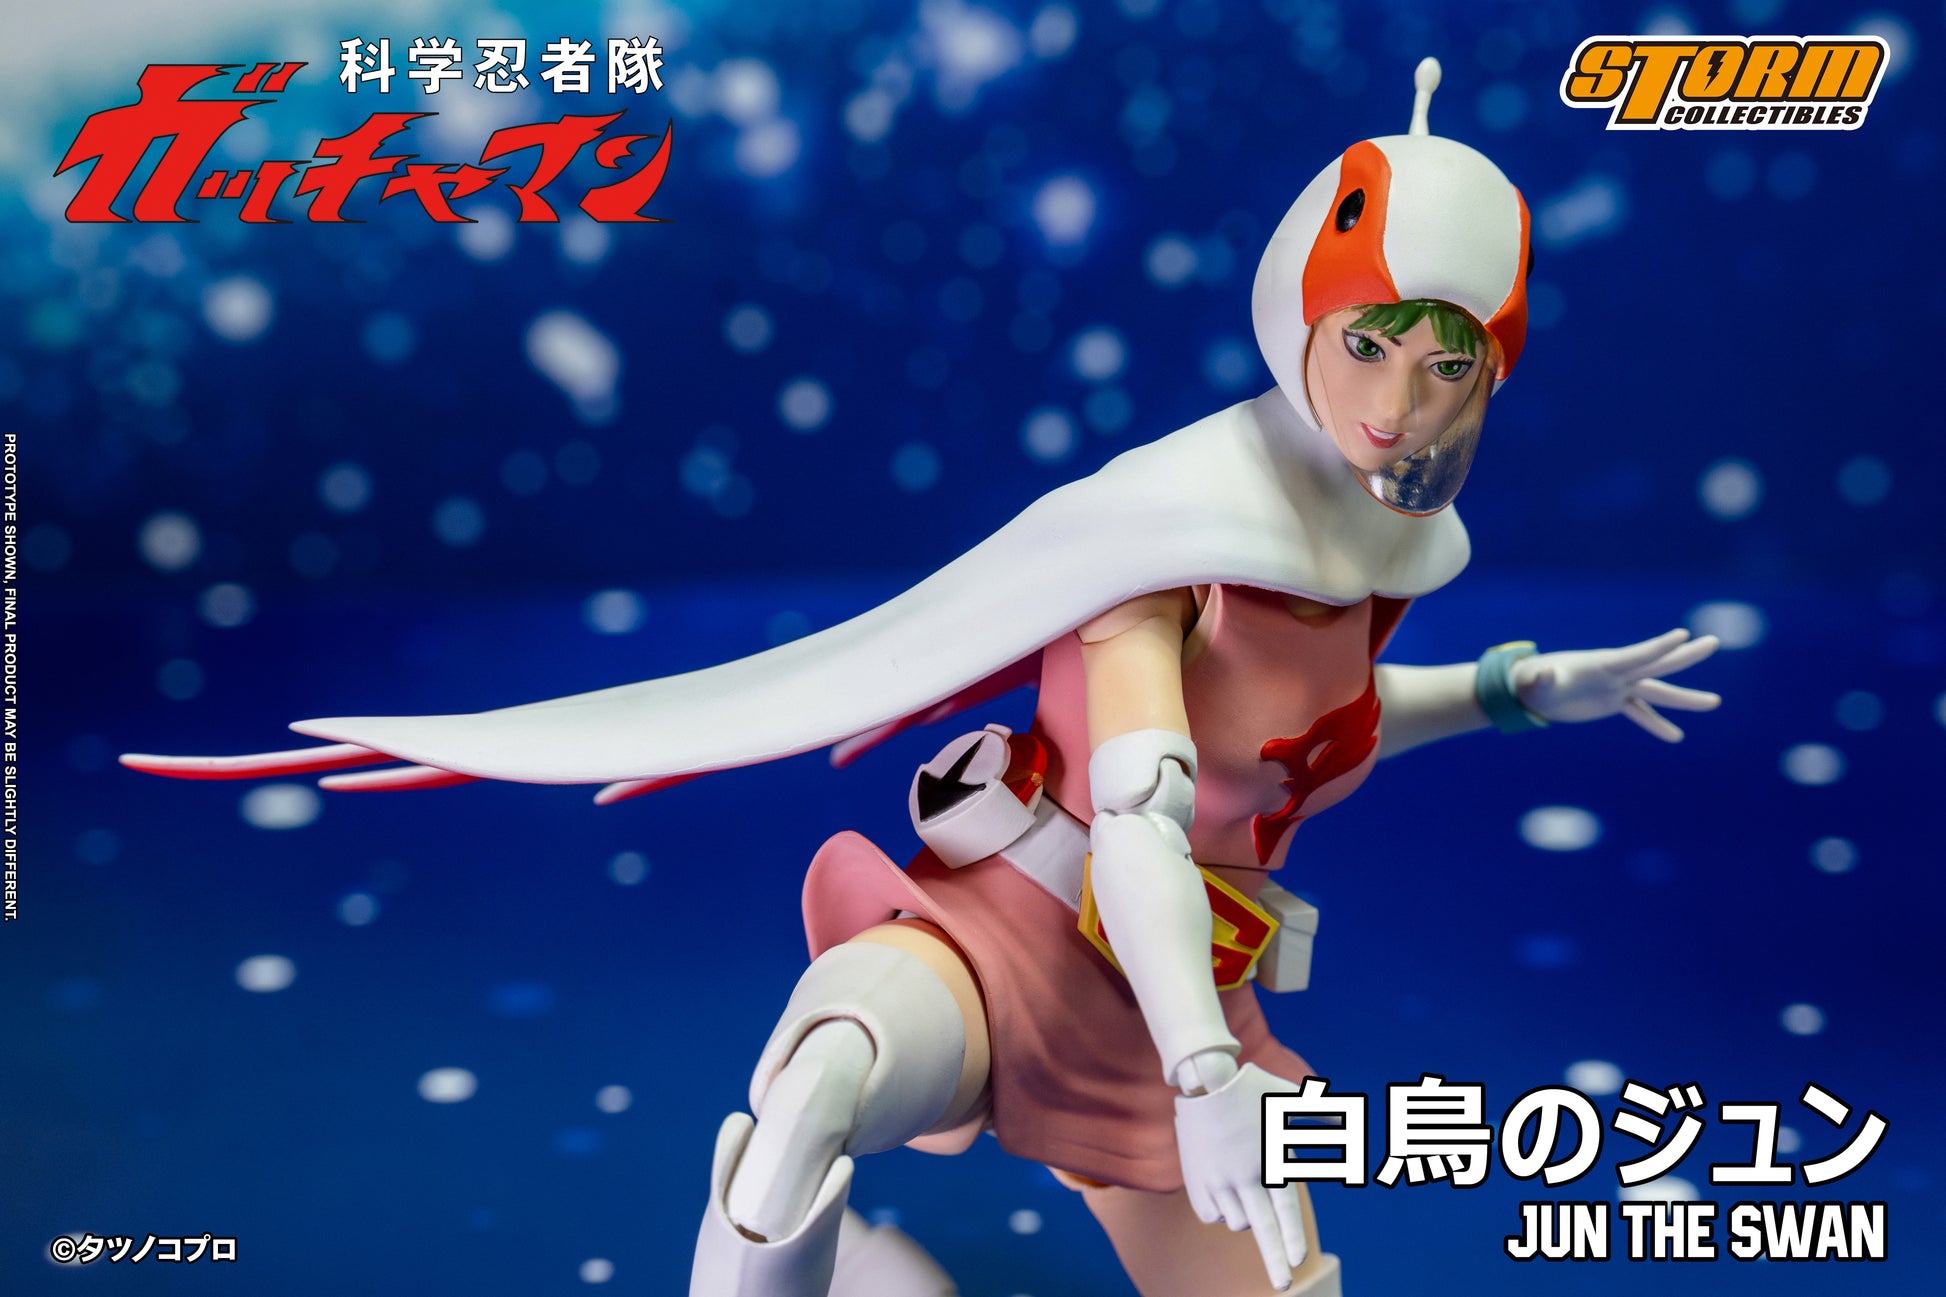 Gatchaman Jun THE SWAN by Storm Collectibles finger pointing down